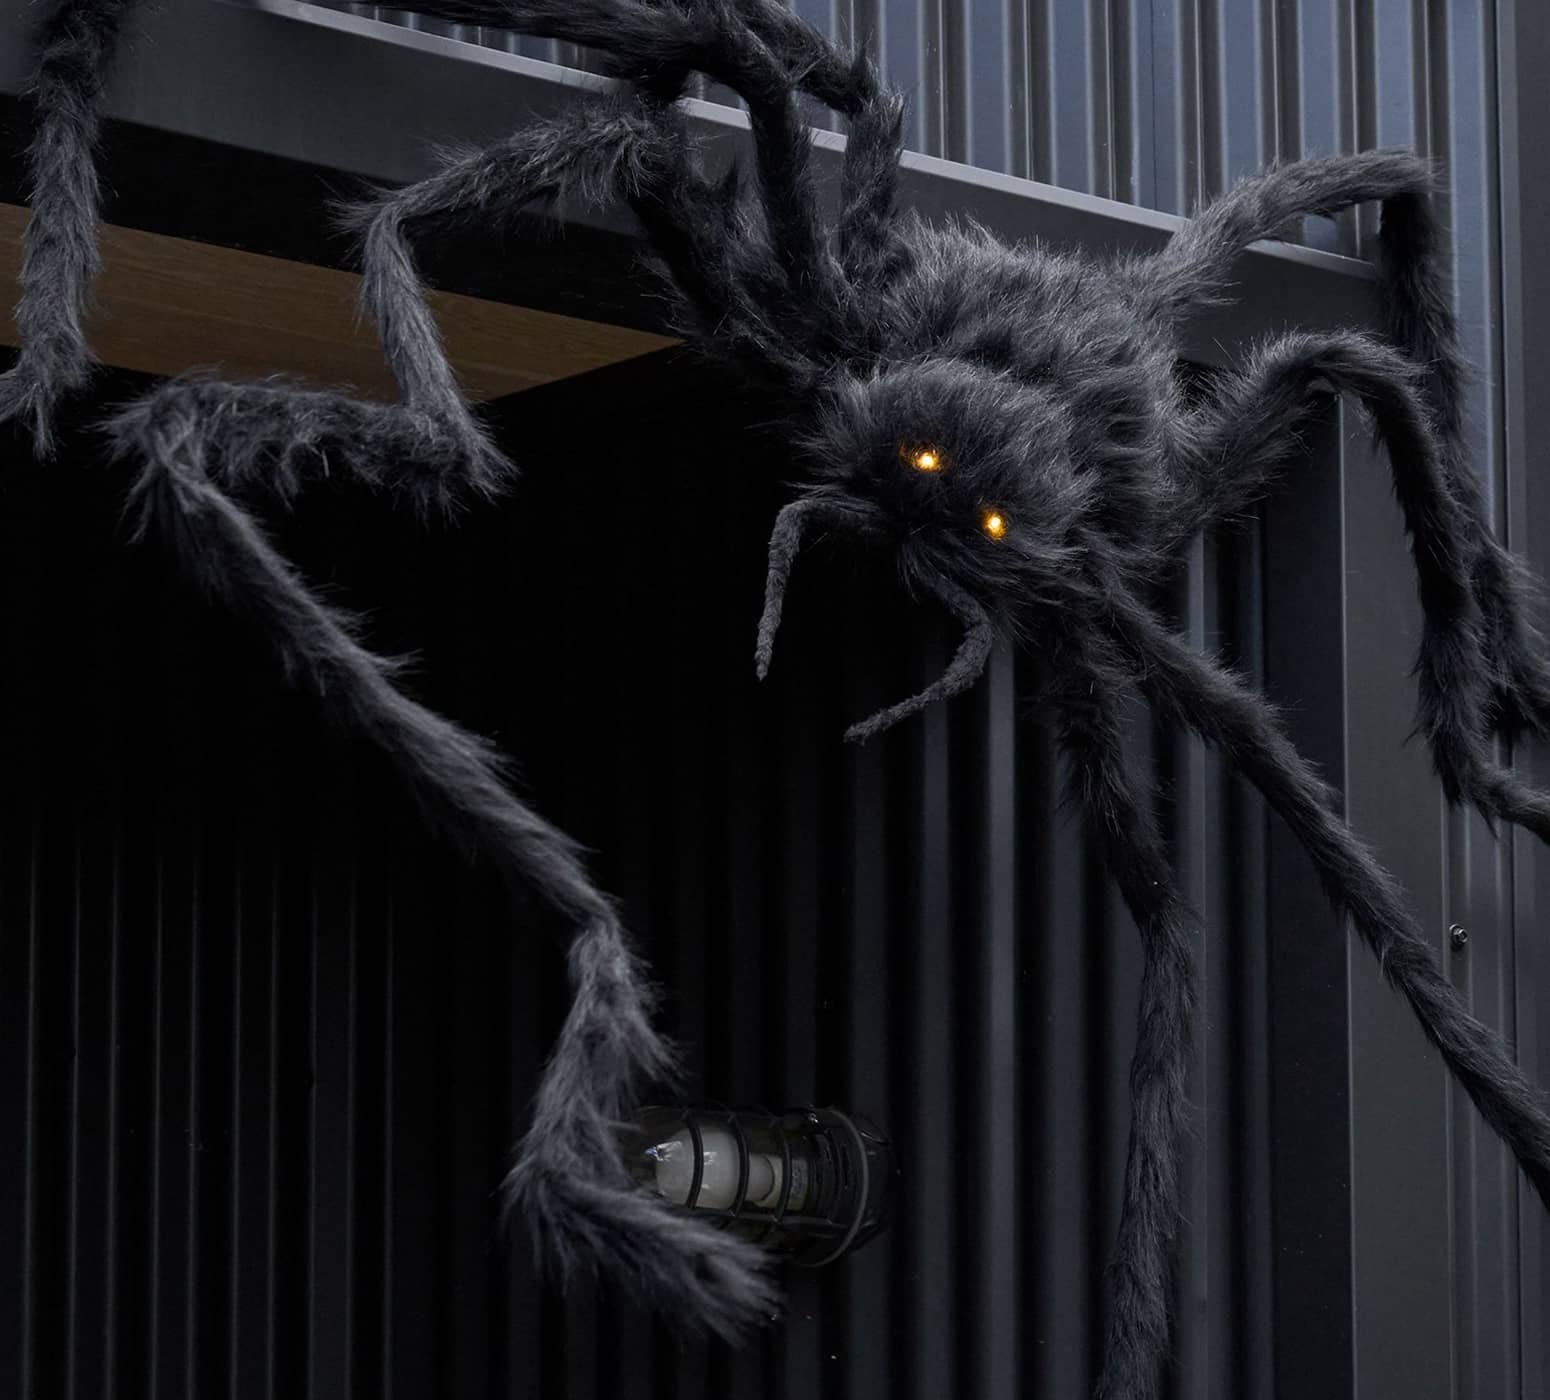 Gigantic 6 Foot Hairy Black Spider With Creepy Light-Up Eyes